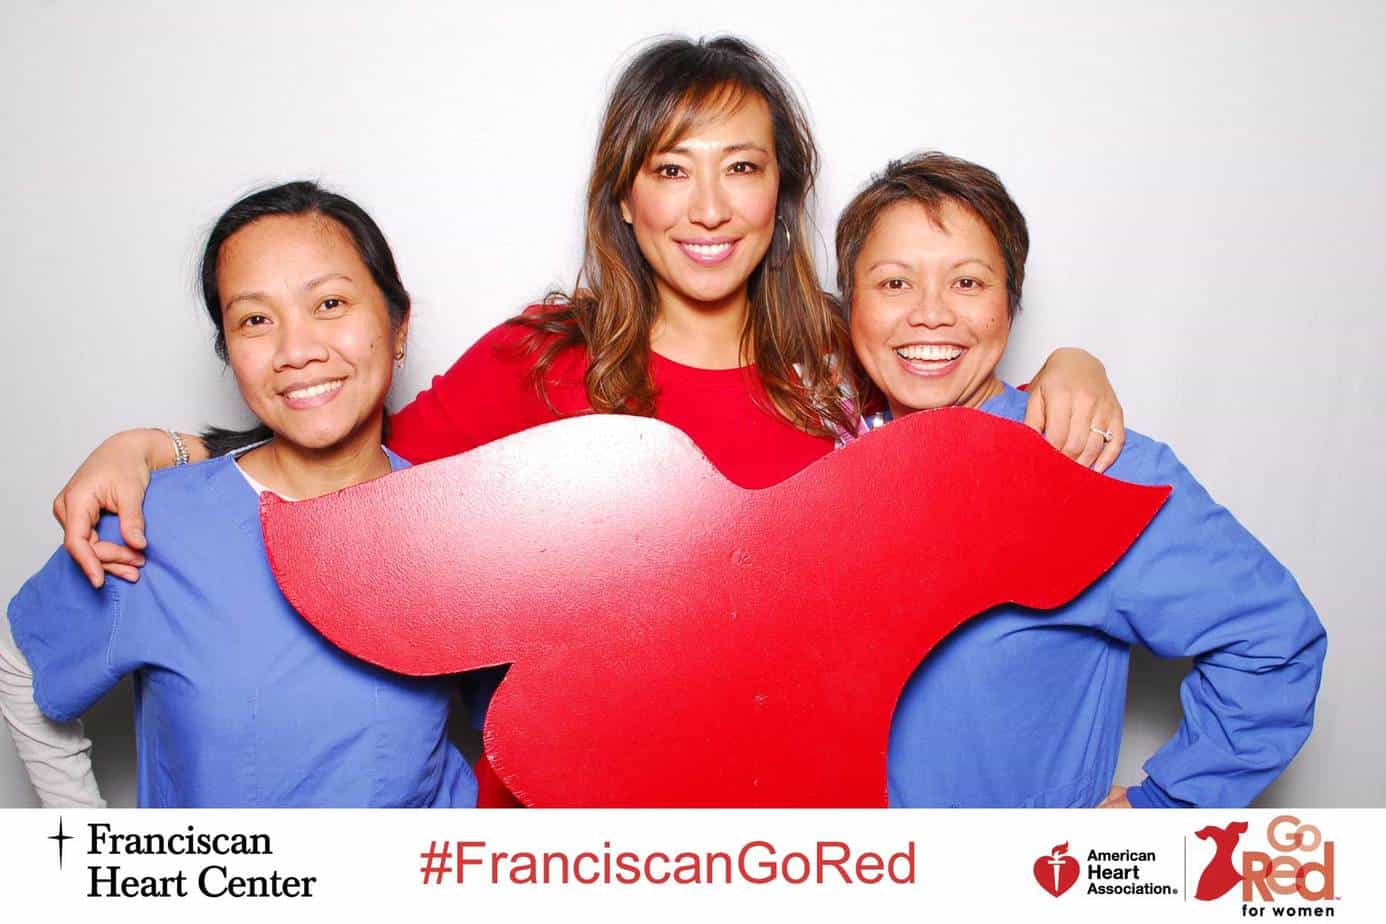 American Heart Association Go Red 1000 Words Photo Booth